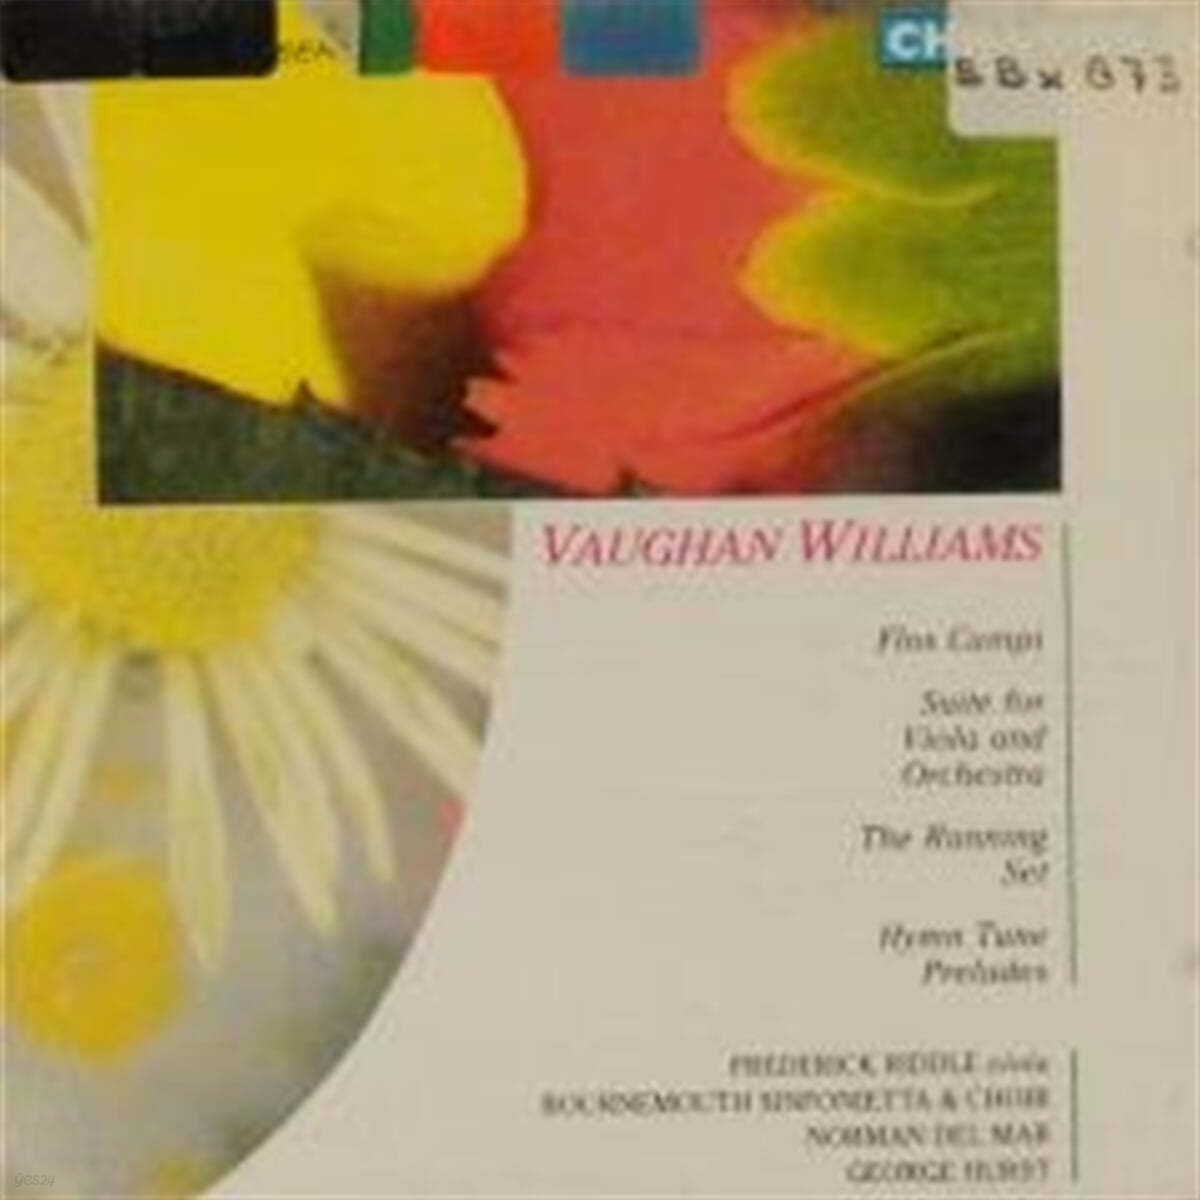 George Hurst 랄프 본 윌리엄스: 푸올스 캠피 (Ralph Vaughan Williams: Flos Campi for Viola, Voices and Orchestra) 